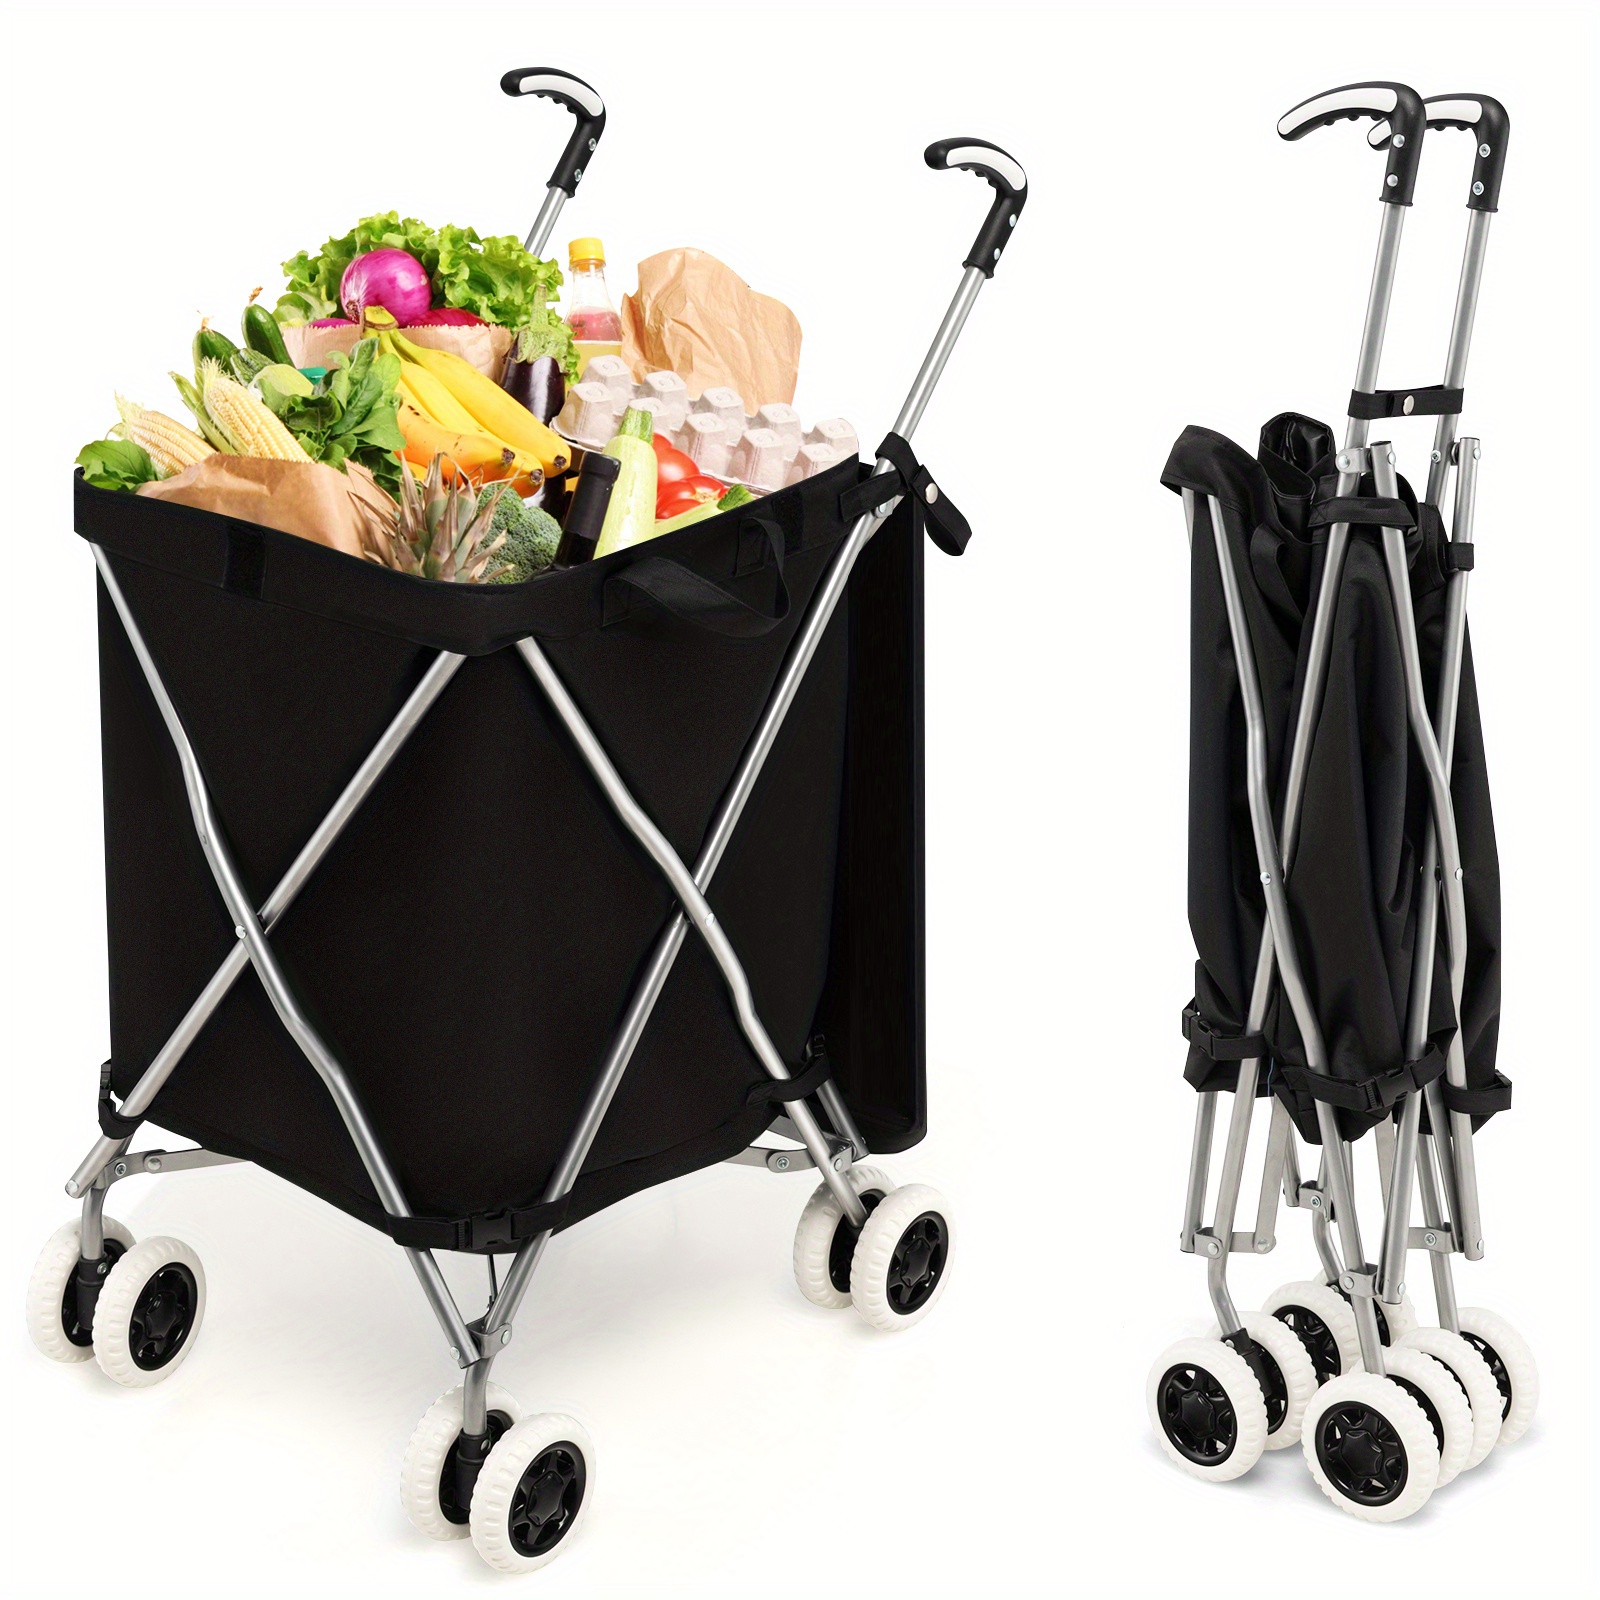 

Lifezeal Folding Shopping Cart Utility W/ Water-resistant Removable Canvas Bag Black